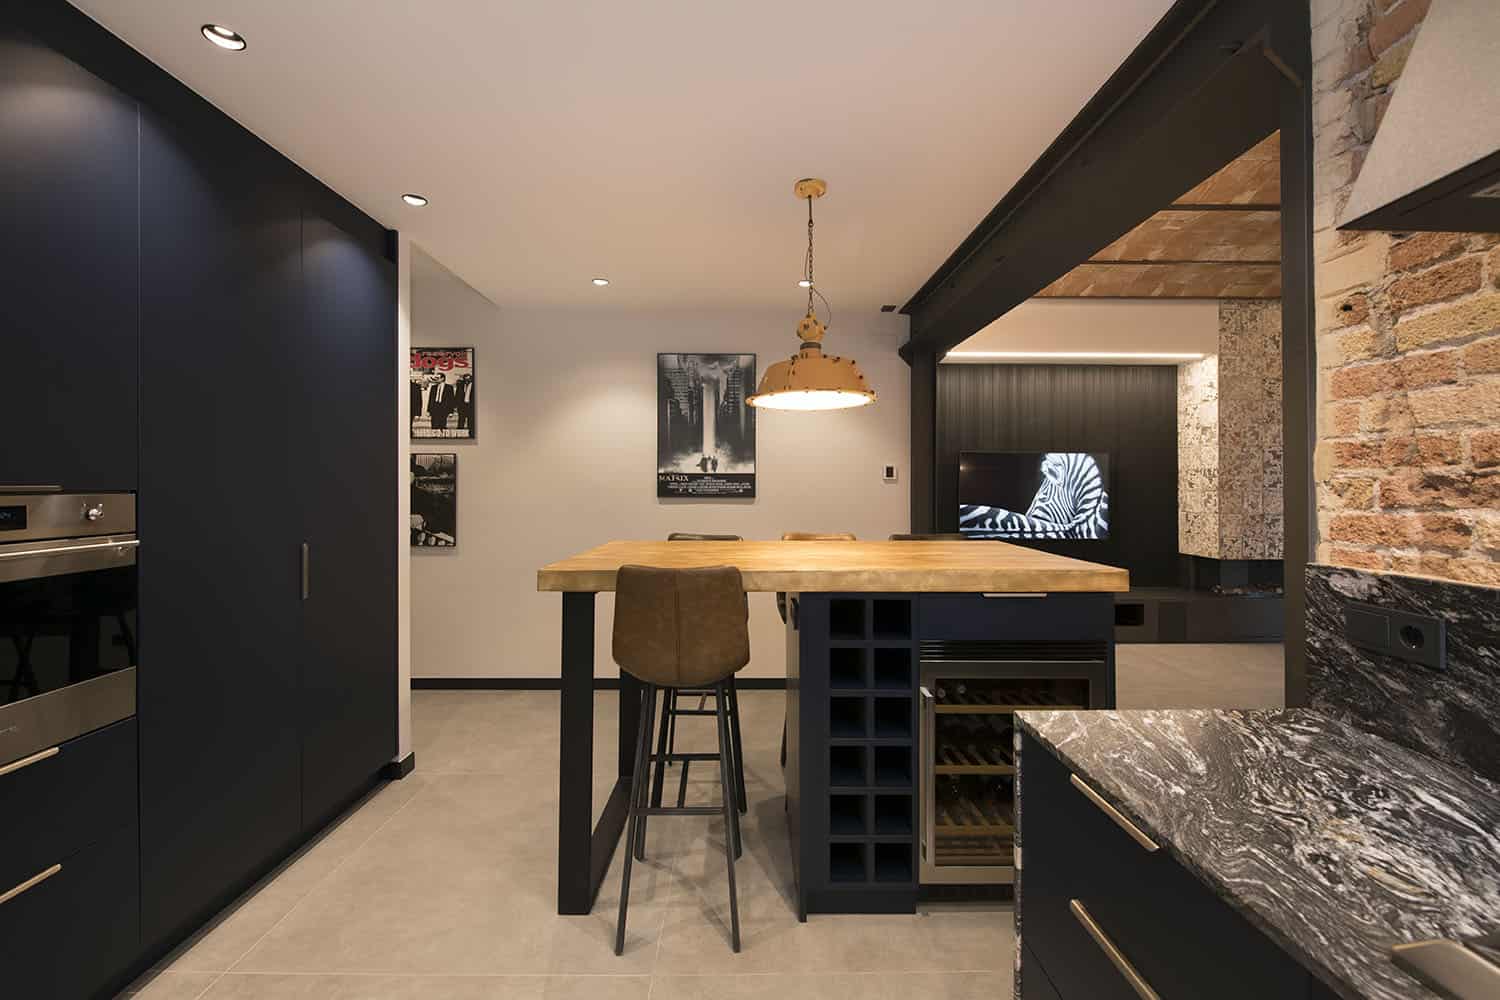 The kitchen island features wine storage, light stained butcherblock countertop and tall leather stools